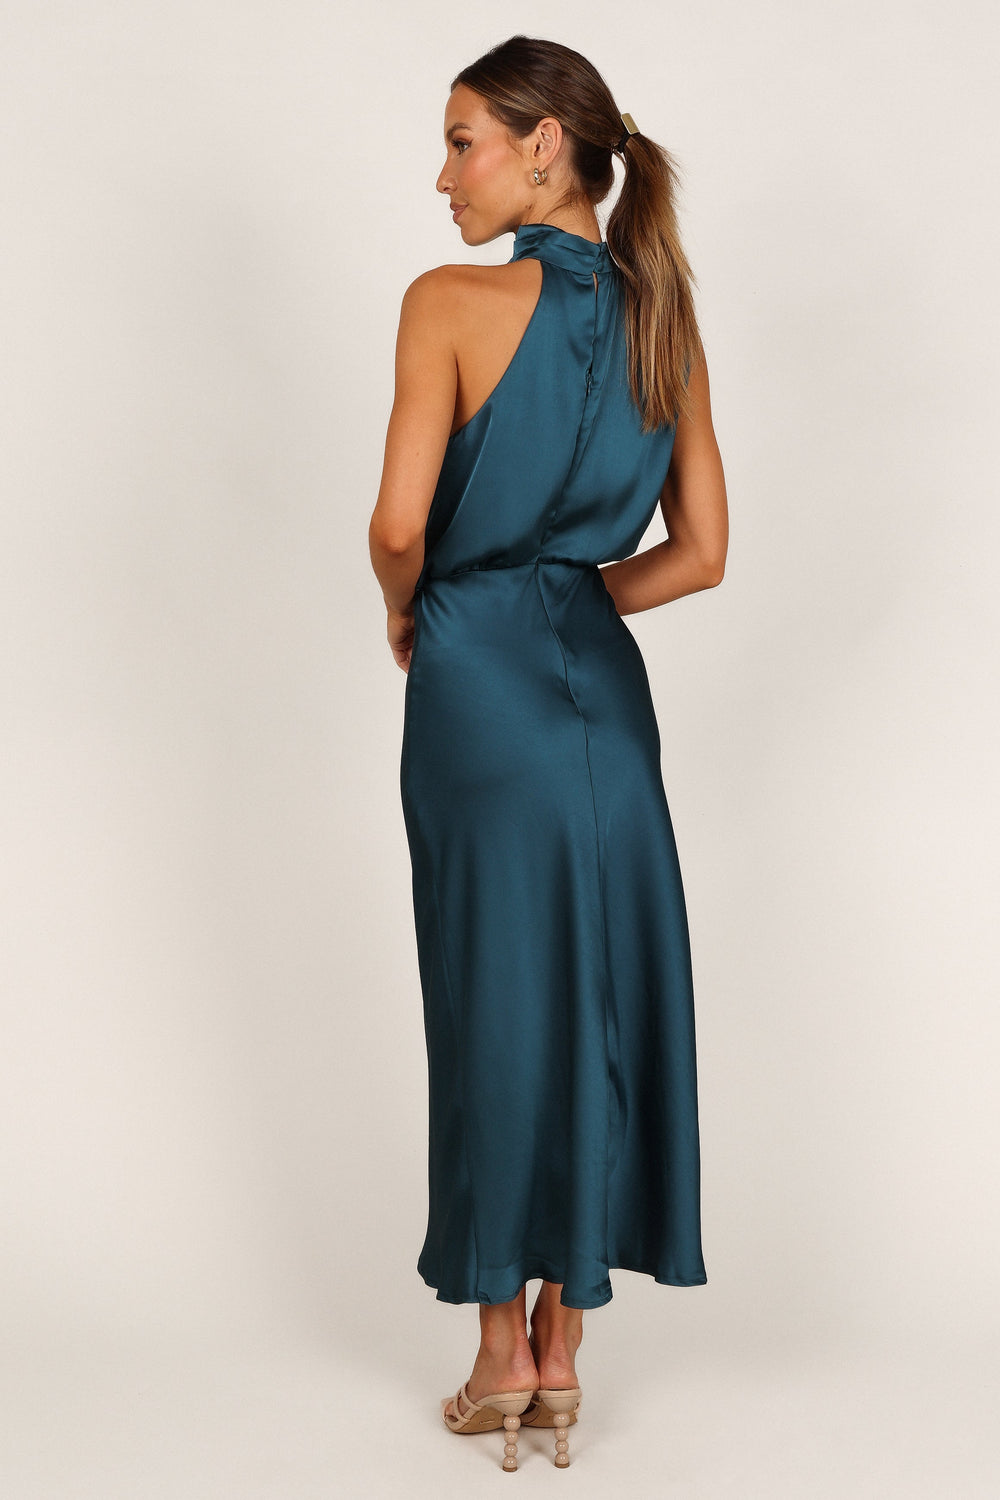 Petal and Pup USA DRESSES Anabelle Halter Neck Maxi Dress - Teal